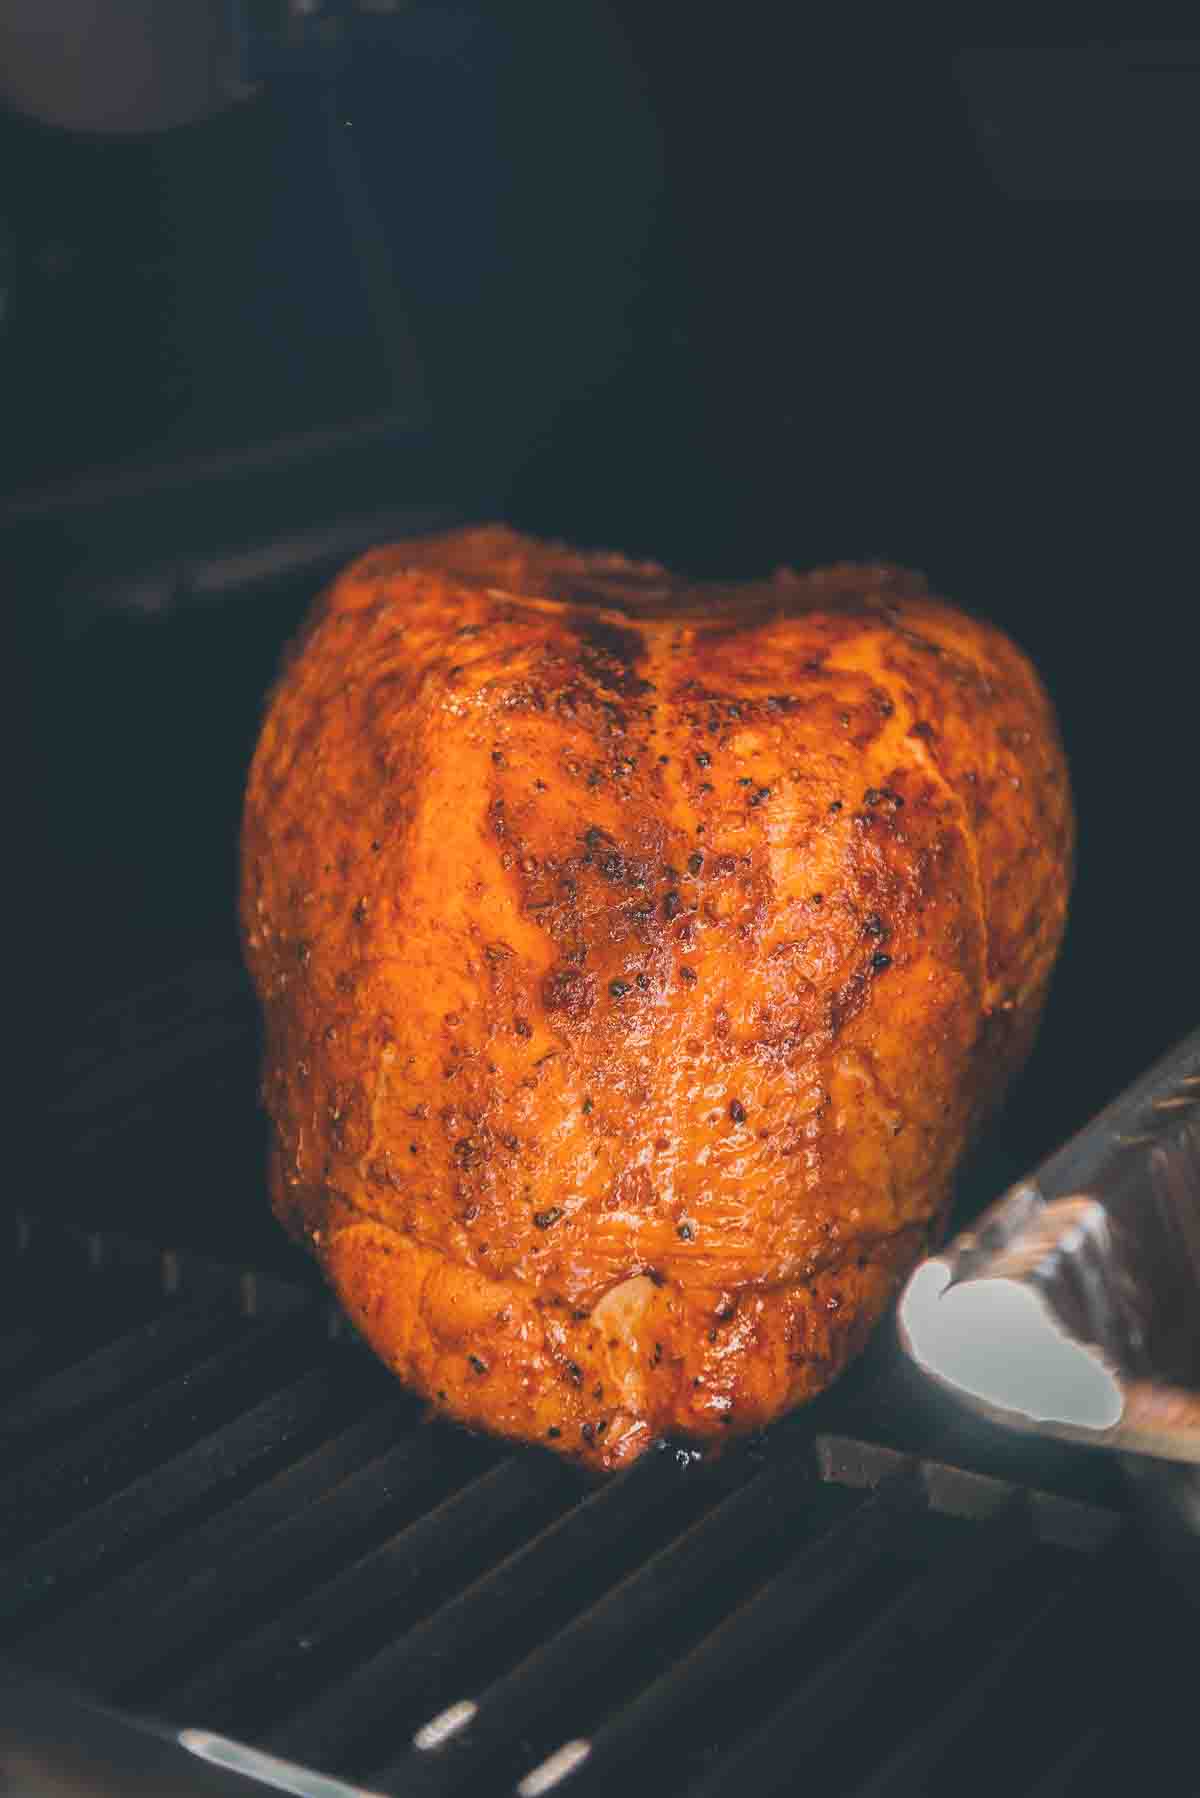 Golden brown skin of the finish smoked turkey on the grill.